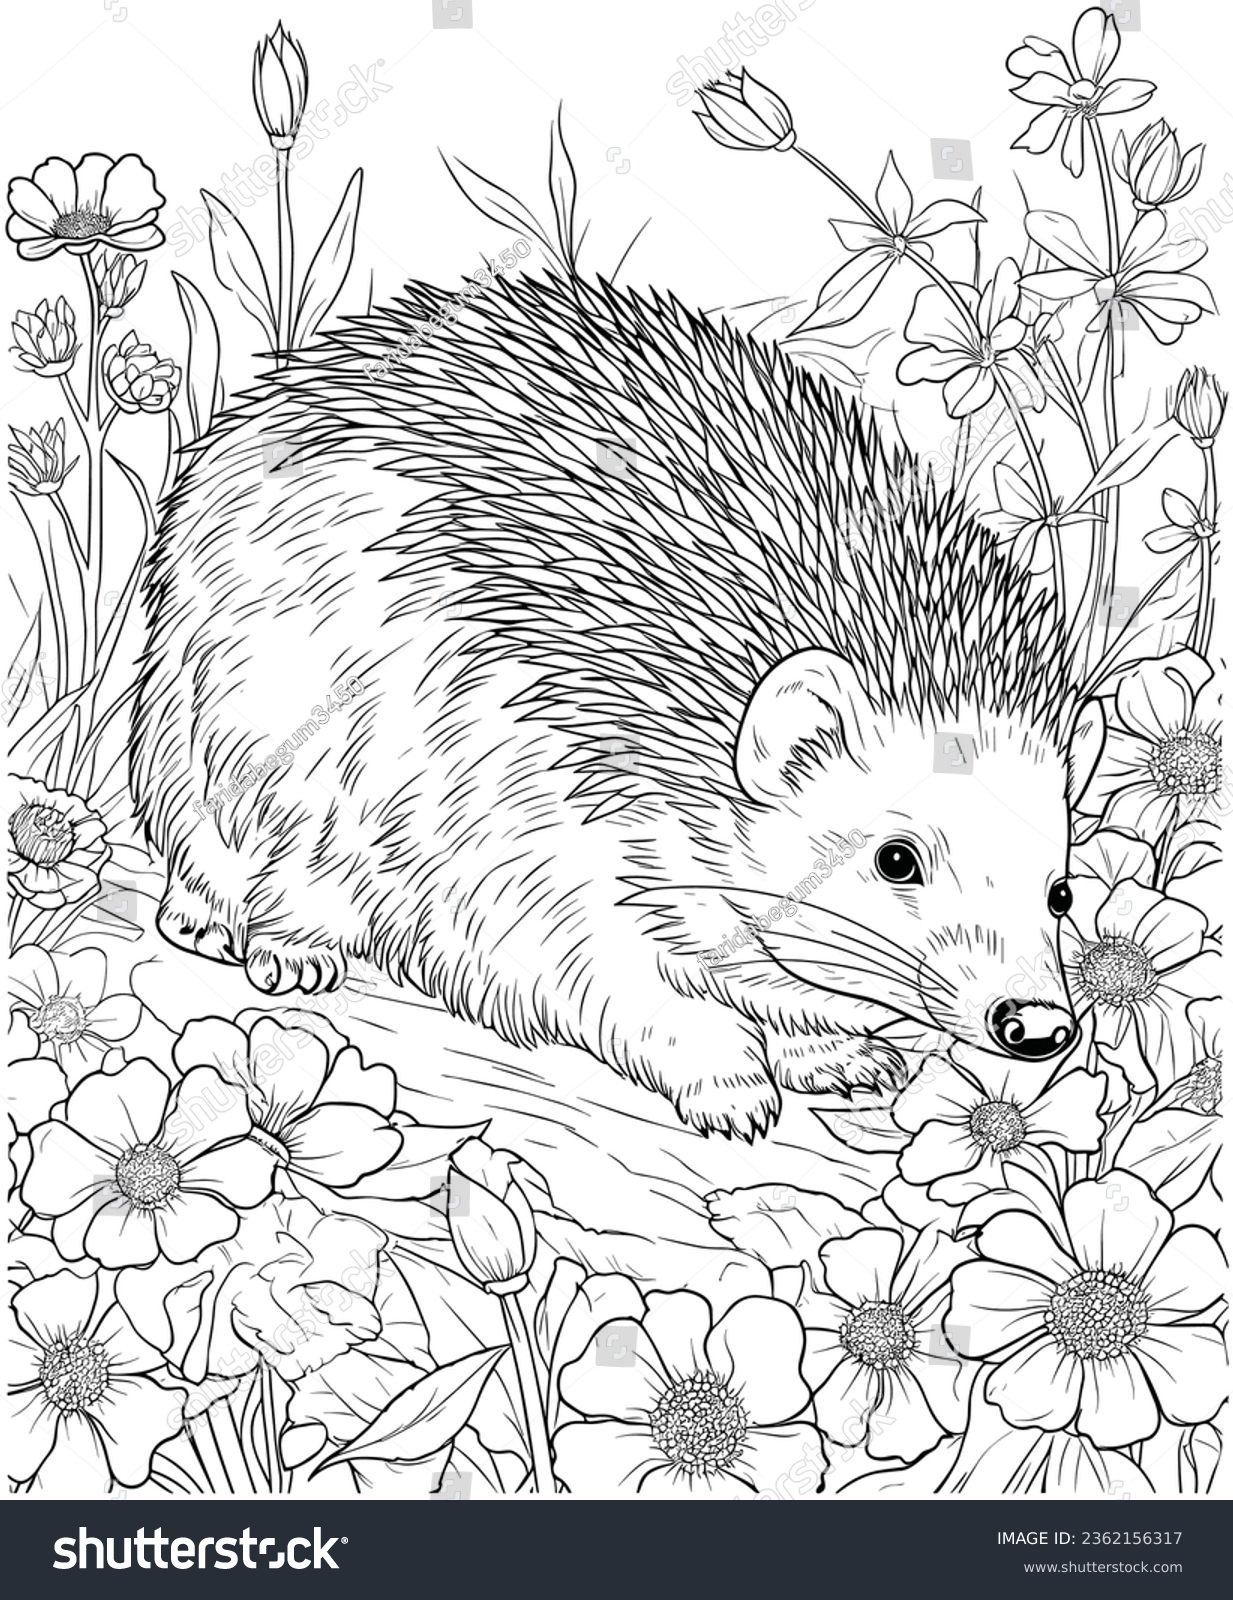 Porcupine flowers coloring page line art stock vector royalty free